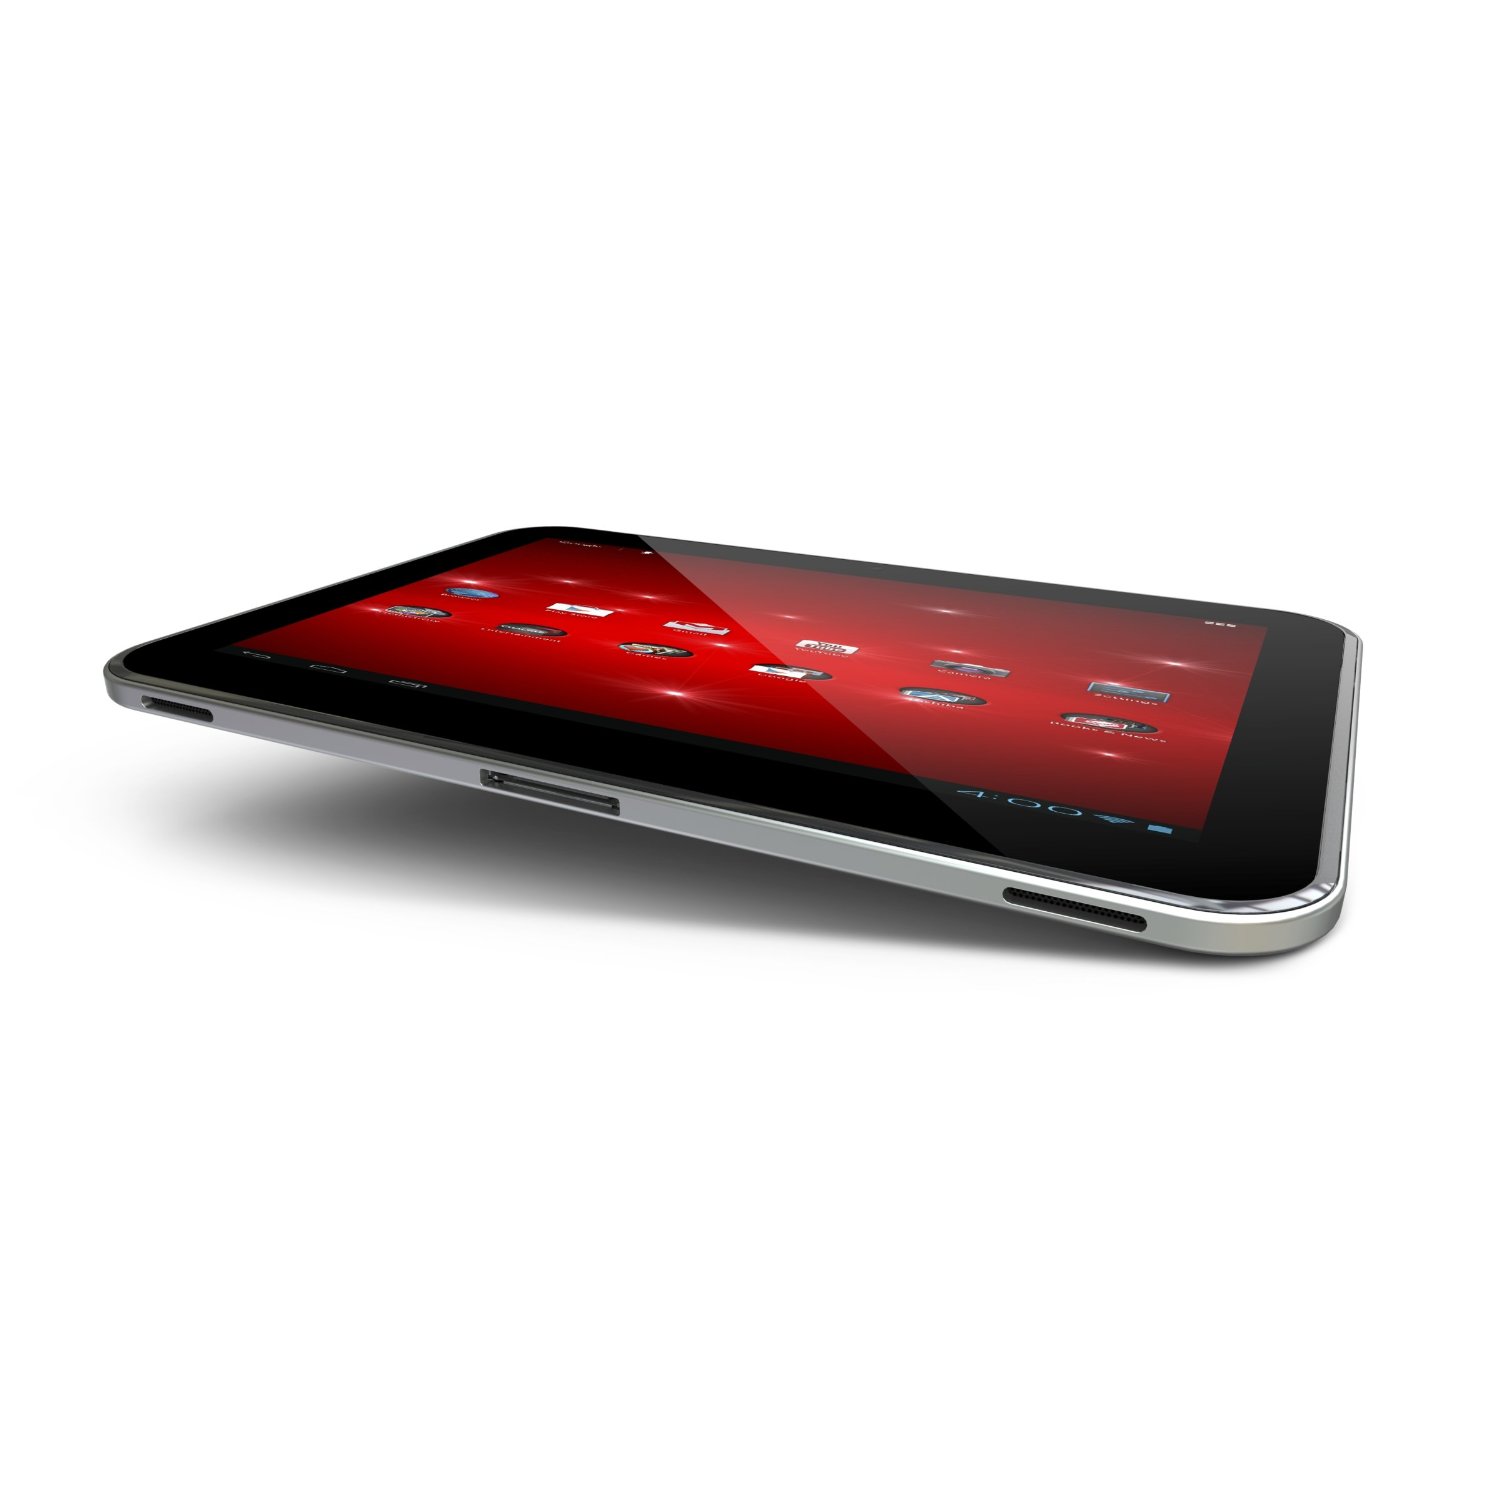 http://thetechjournal.com/wp-content/uploads/images/1206/1340174474-toshiba-excite-101inch-tablet-powered-by-android-40-10.jpg